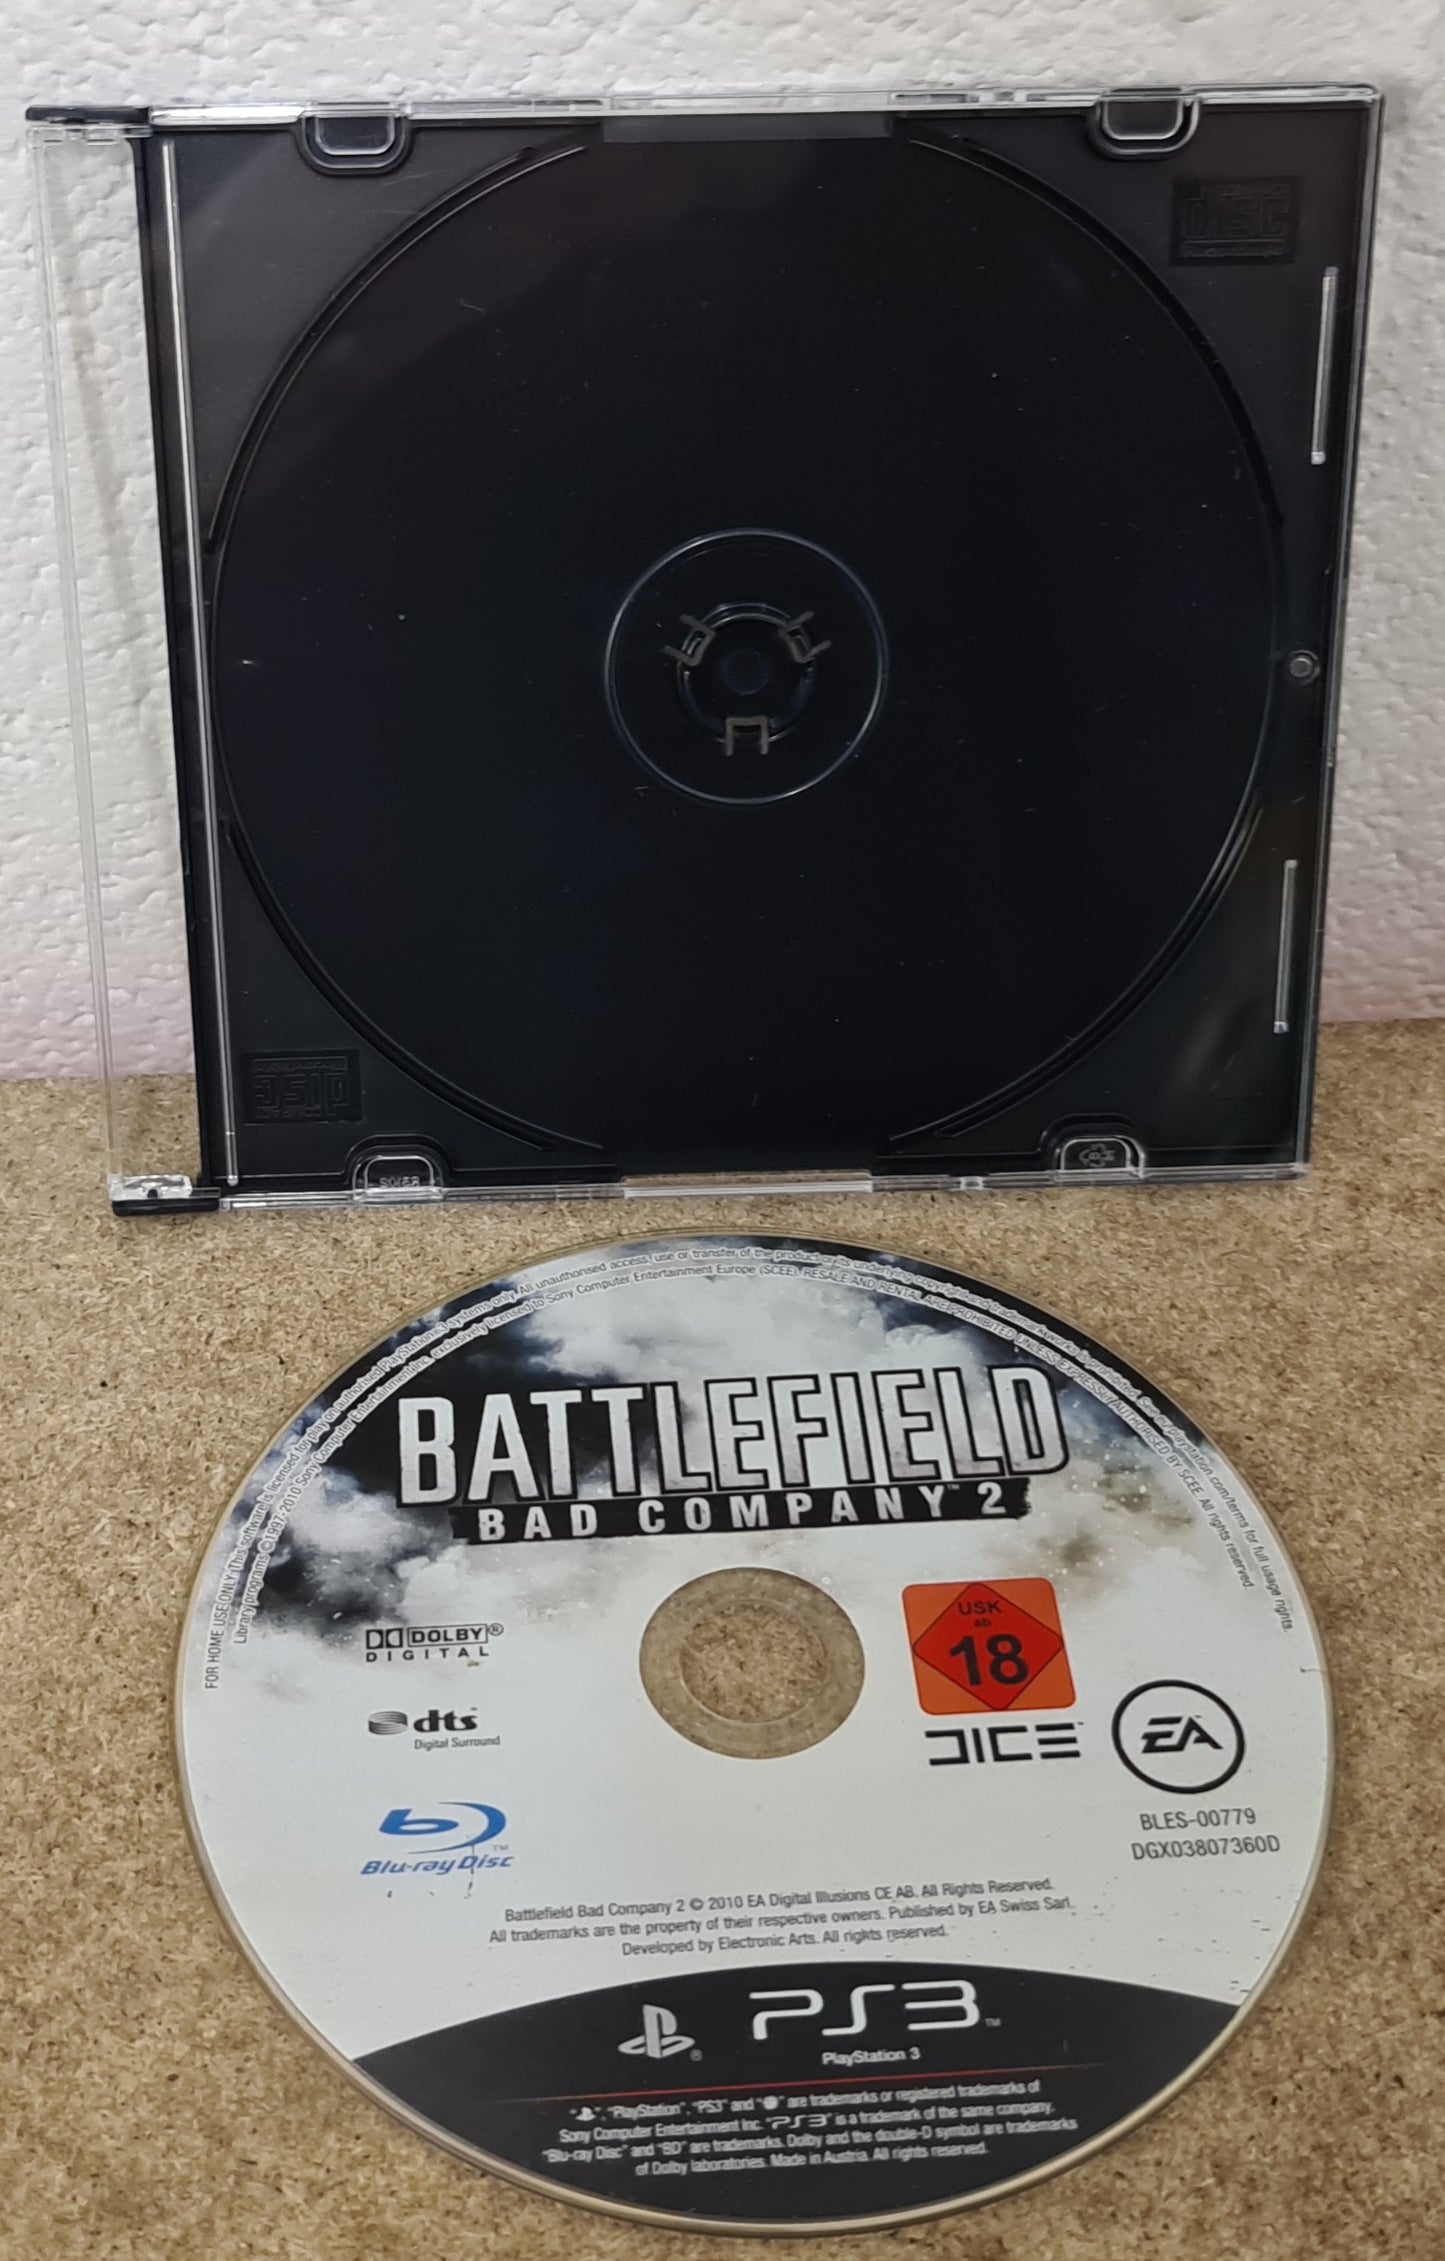 Battlefield Bad Company 2 Sony Playstation 3 (PS3) Game Disc Only